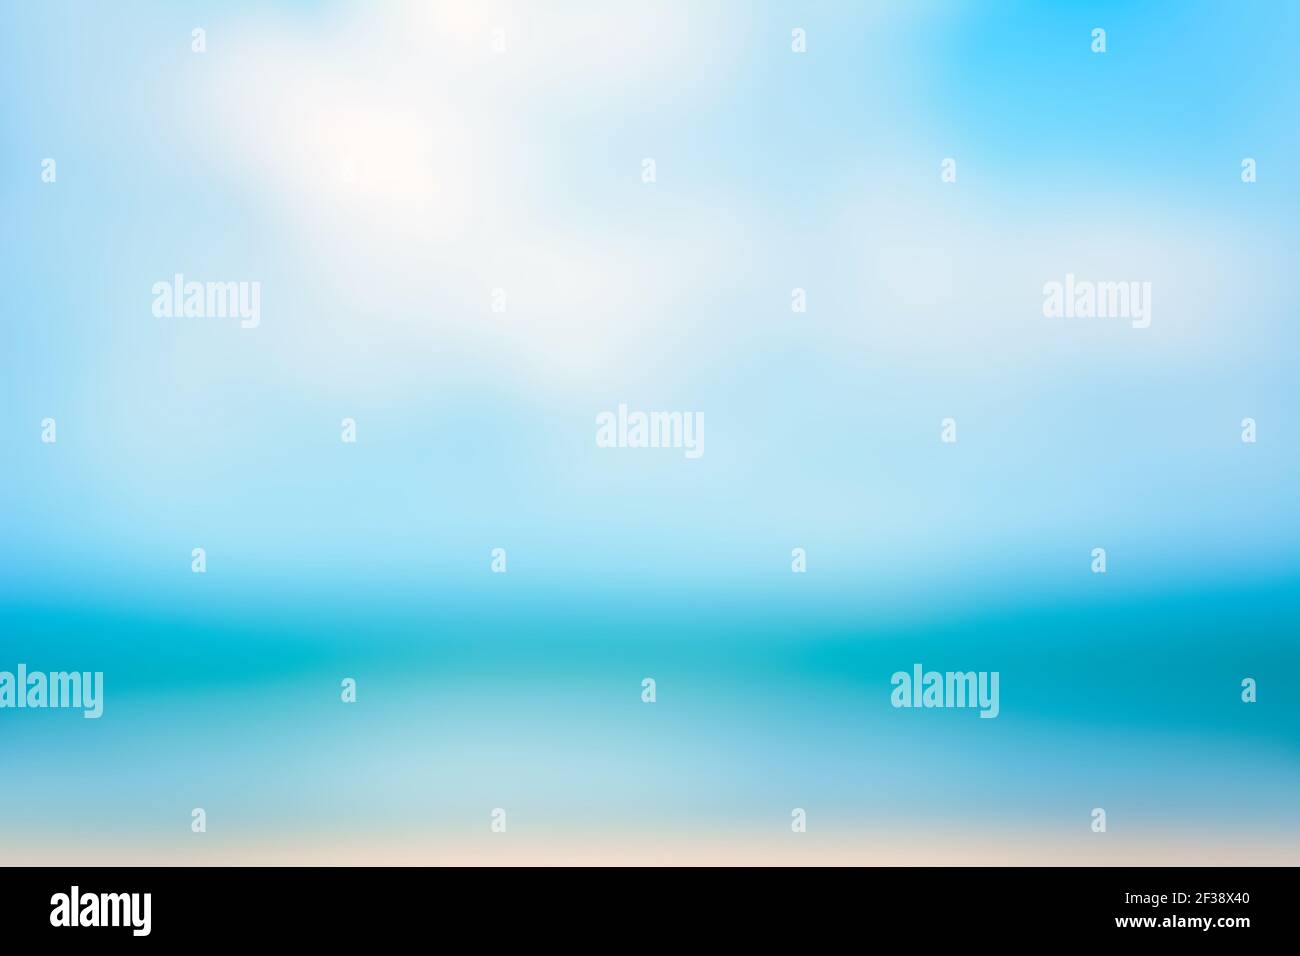 Blur abstract background from blue sea and sky Stock Photo